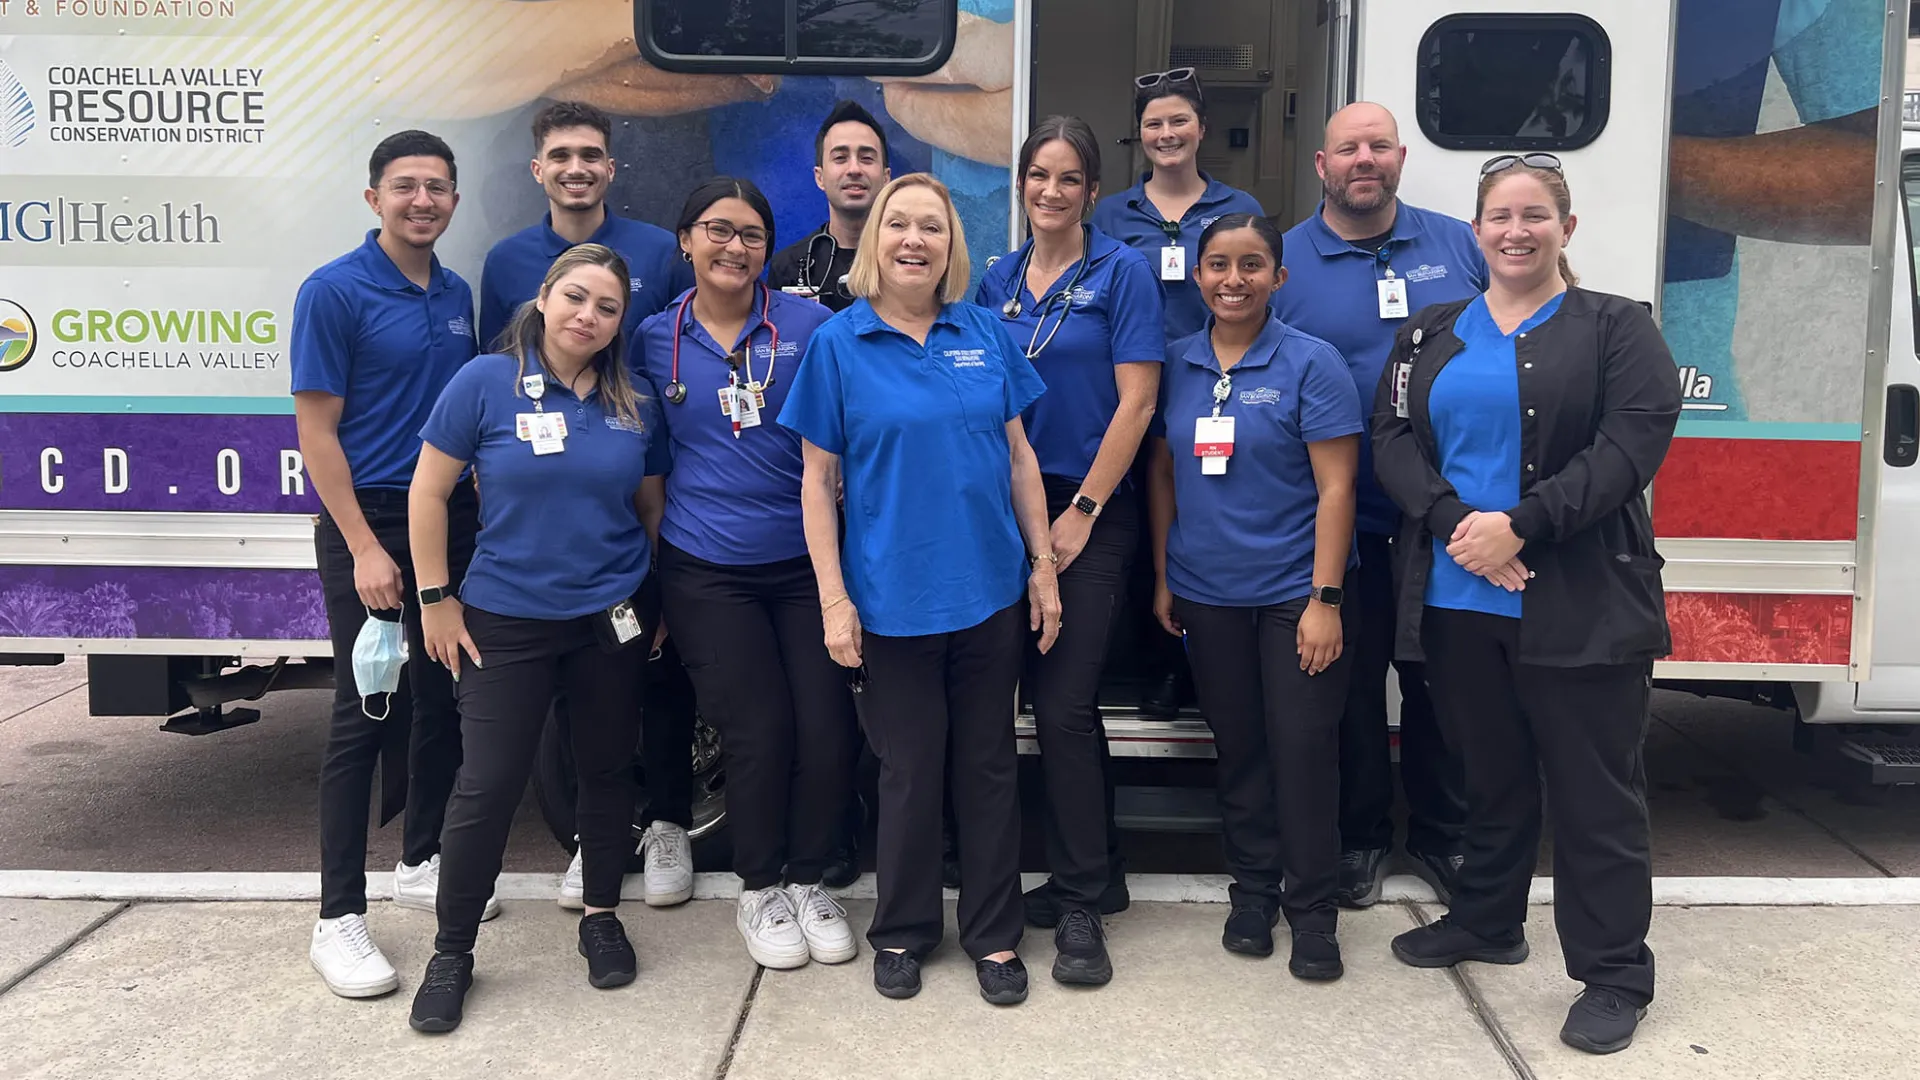 Members of the CSUSB Nursing Street Medicine Program pose in front of a new mobile medical clinic at the unveiling and ribbon-cutting ceremony in Palm Springs, Calif. on Dec. 2. From L to R: Danny Castaneda, Veronica Cretsinger, Sayaff Eid, Jessica Rodriguez, Alexis Molina Gonzalez, Diane Vines, Sarah Harrington, Julie Suriano, Nallely Herrera, Matthew Morse, Catherine Lievanos. 